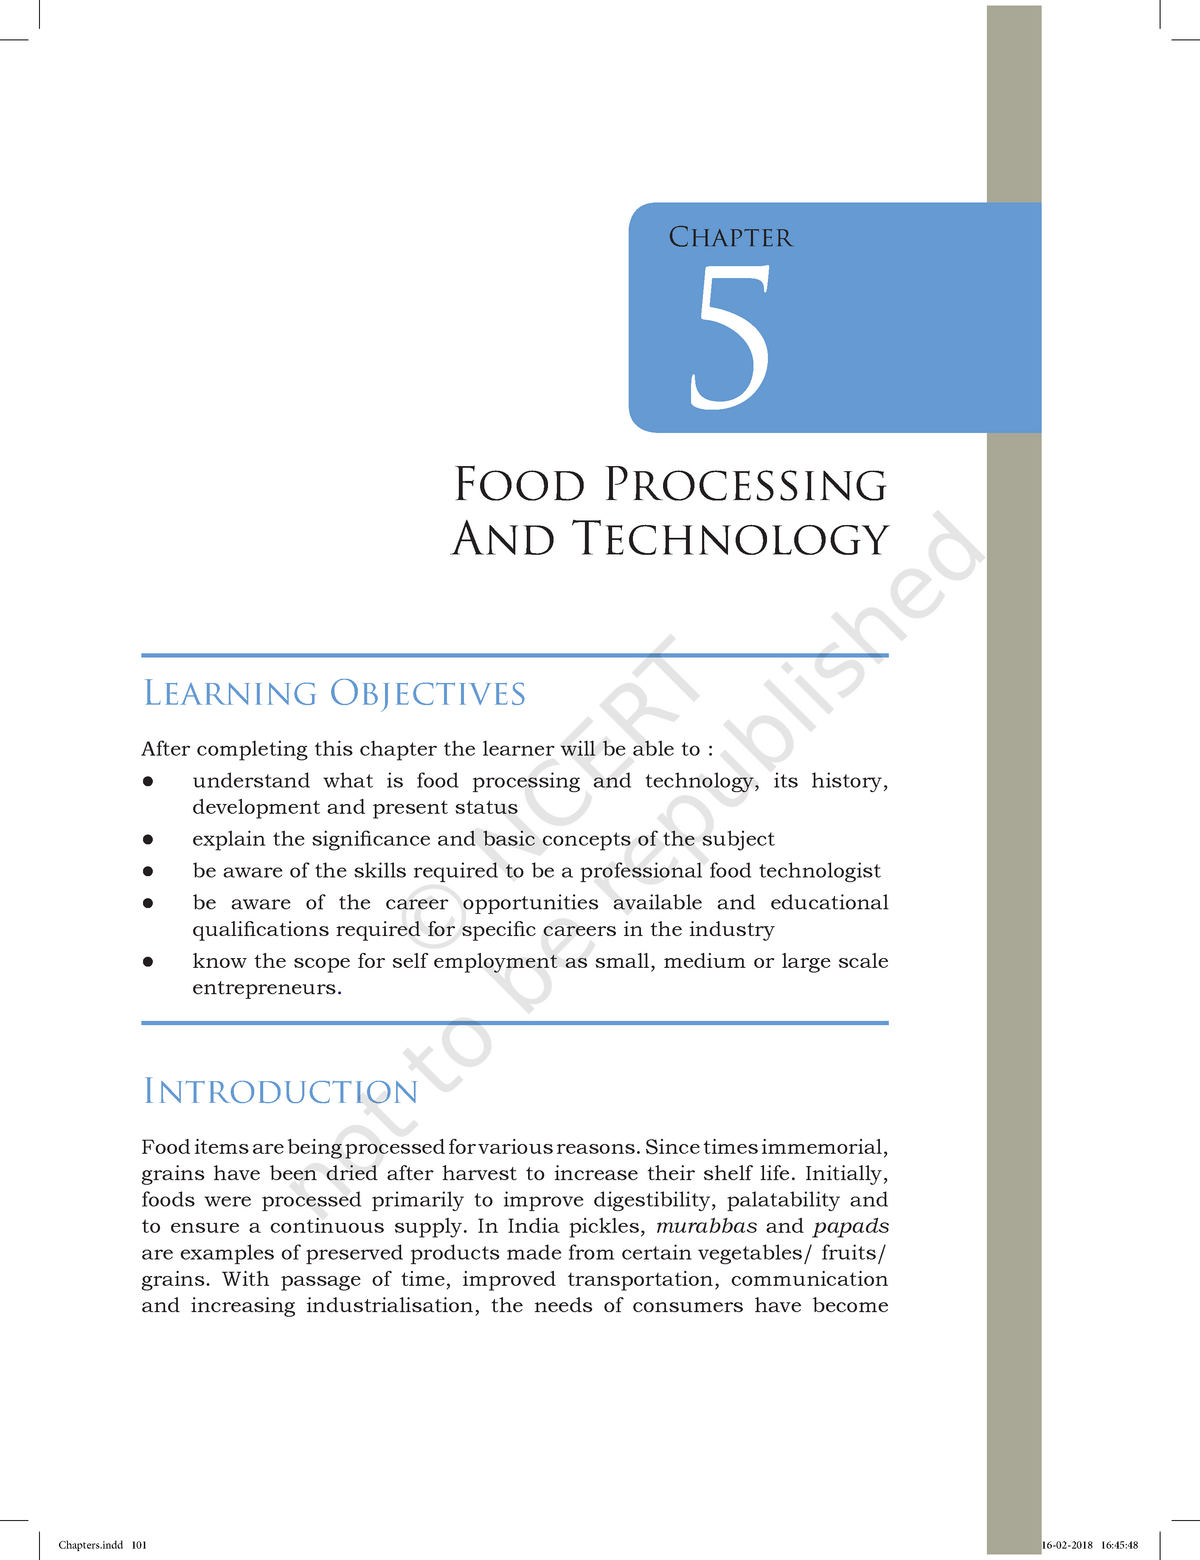 food technology thesis ideas